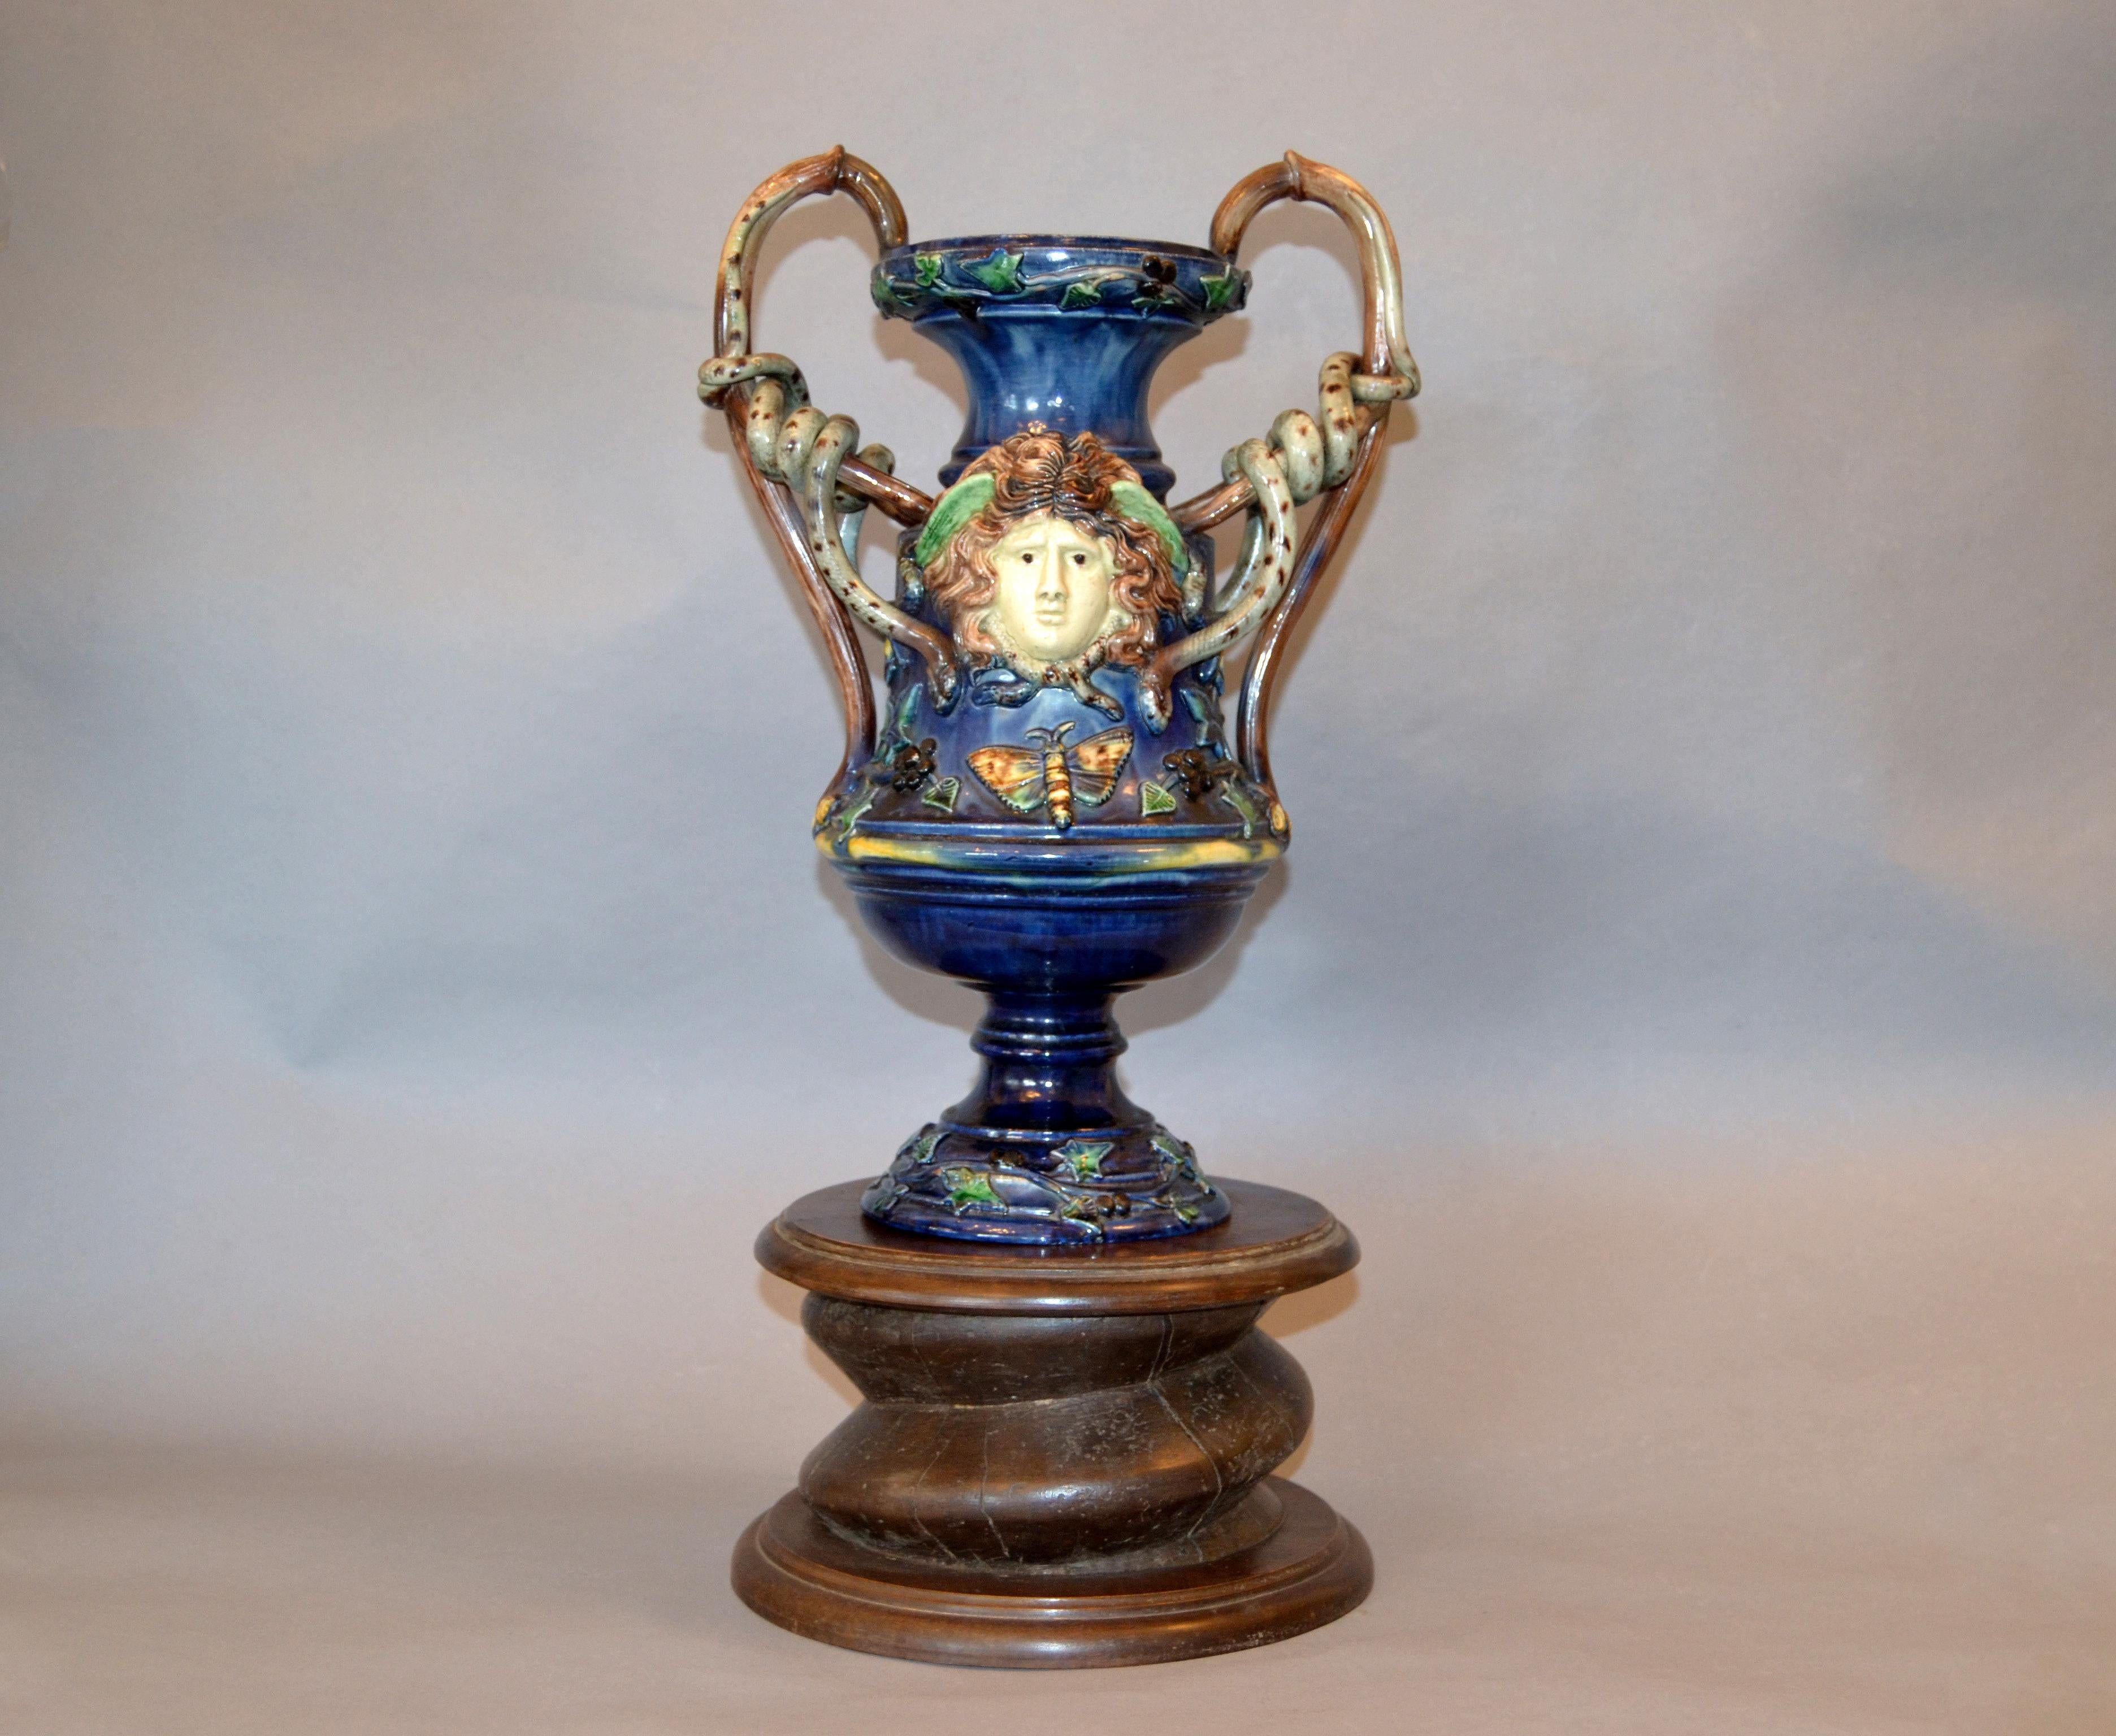 This neoclassical wine themed antique glazed and hand painted ceramic wine jar, vase, decanter was made in France, circa 1890.
The brown handles are shaped like old vines and snakes are surrounding them.
It is decorated with colorful blue grapes,